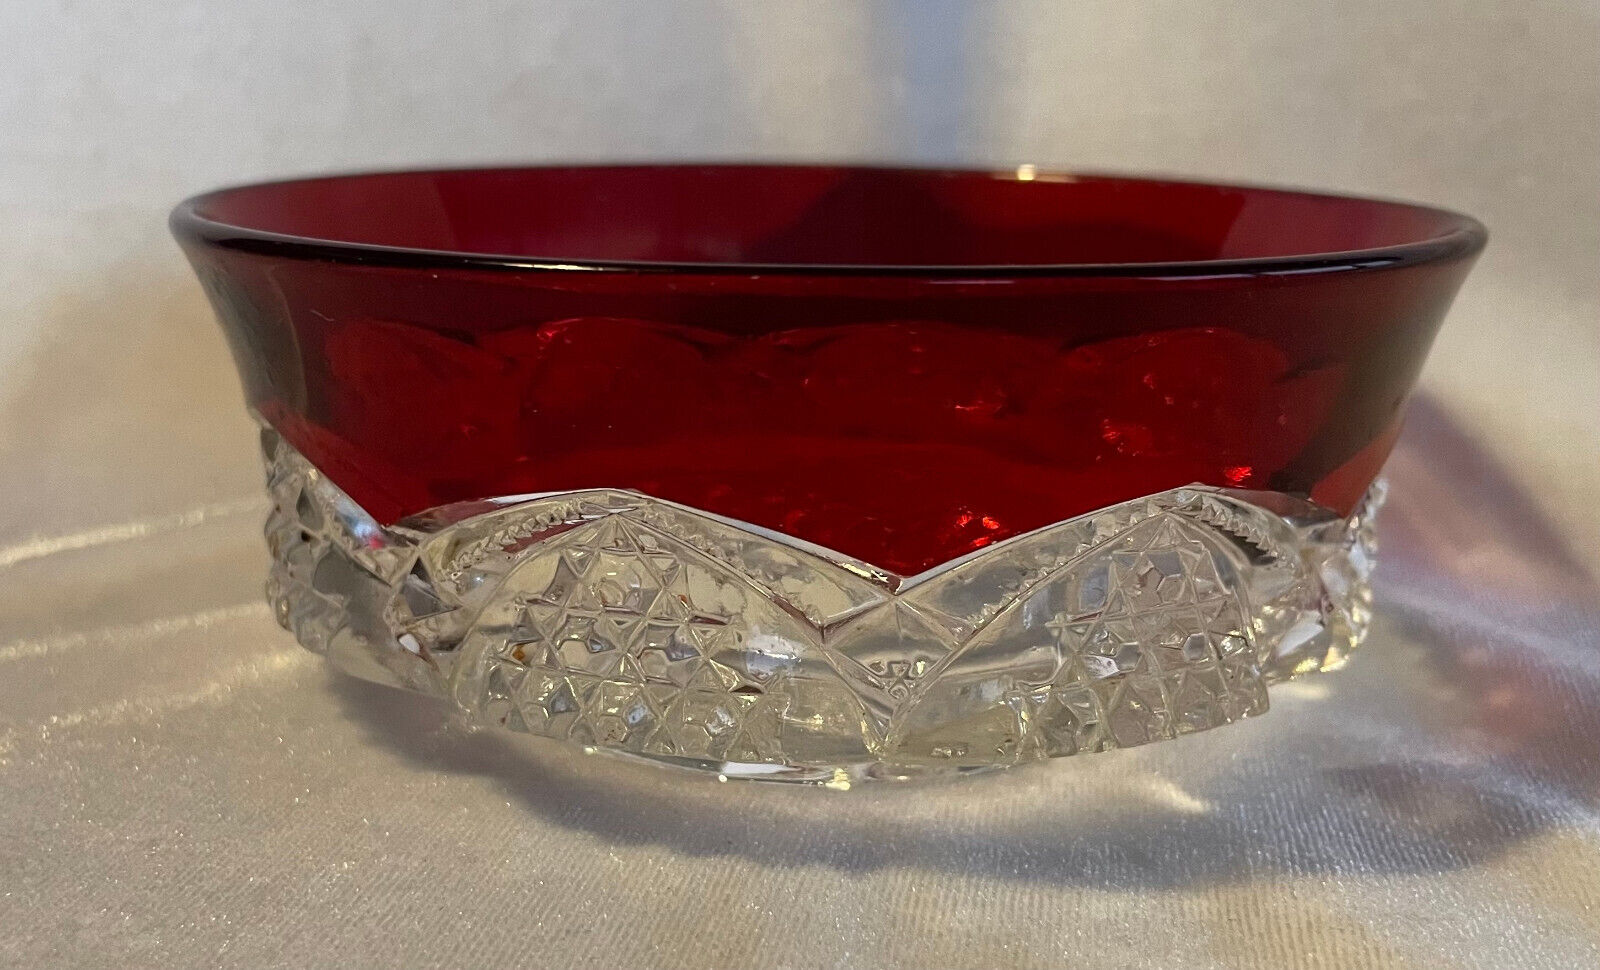 1900s EAPG Duncan Miller Button & Arches Ruby Flashed Mug and Bowl Set Без бренда - фотография #5